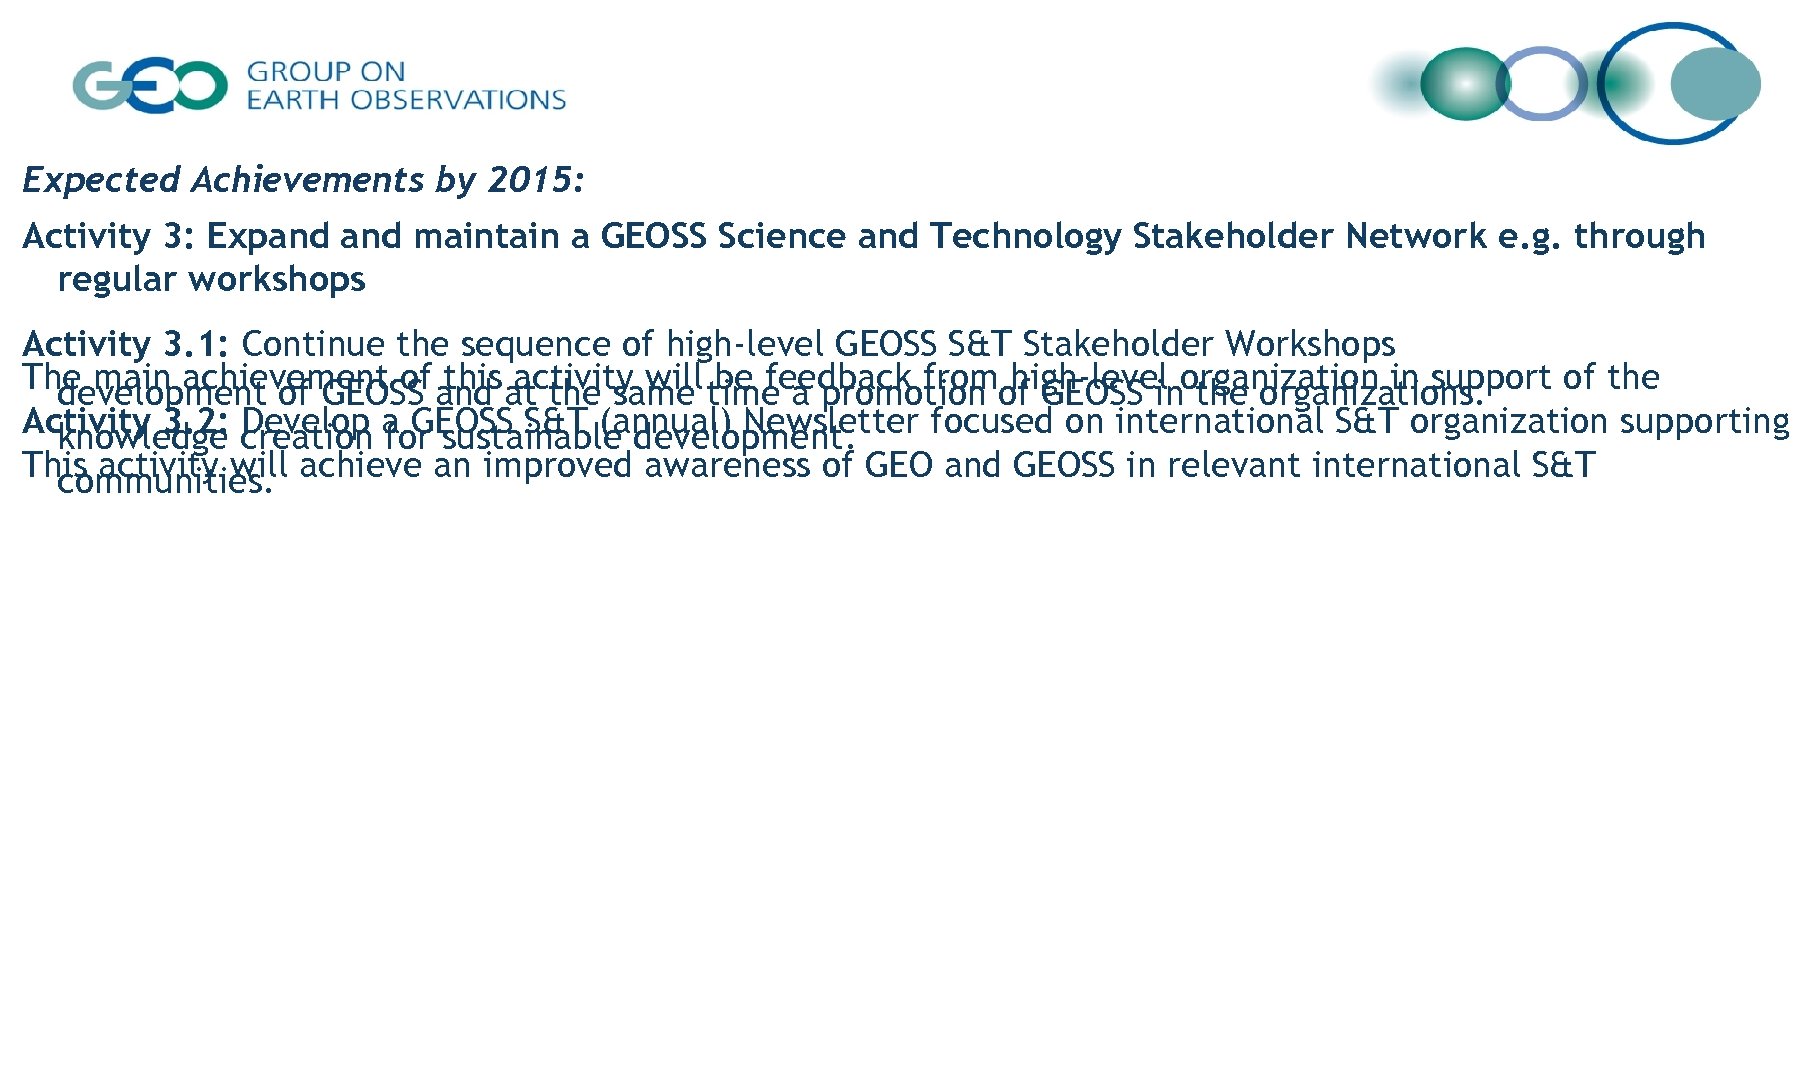 Expected Achievements by 2015: Activity 3: Expand maintain a GEOSS Science and Technology Stakeholder